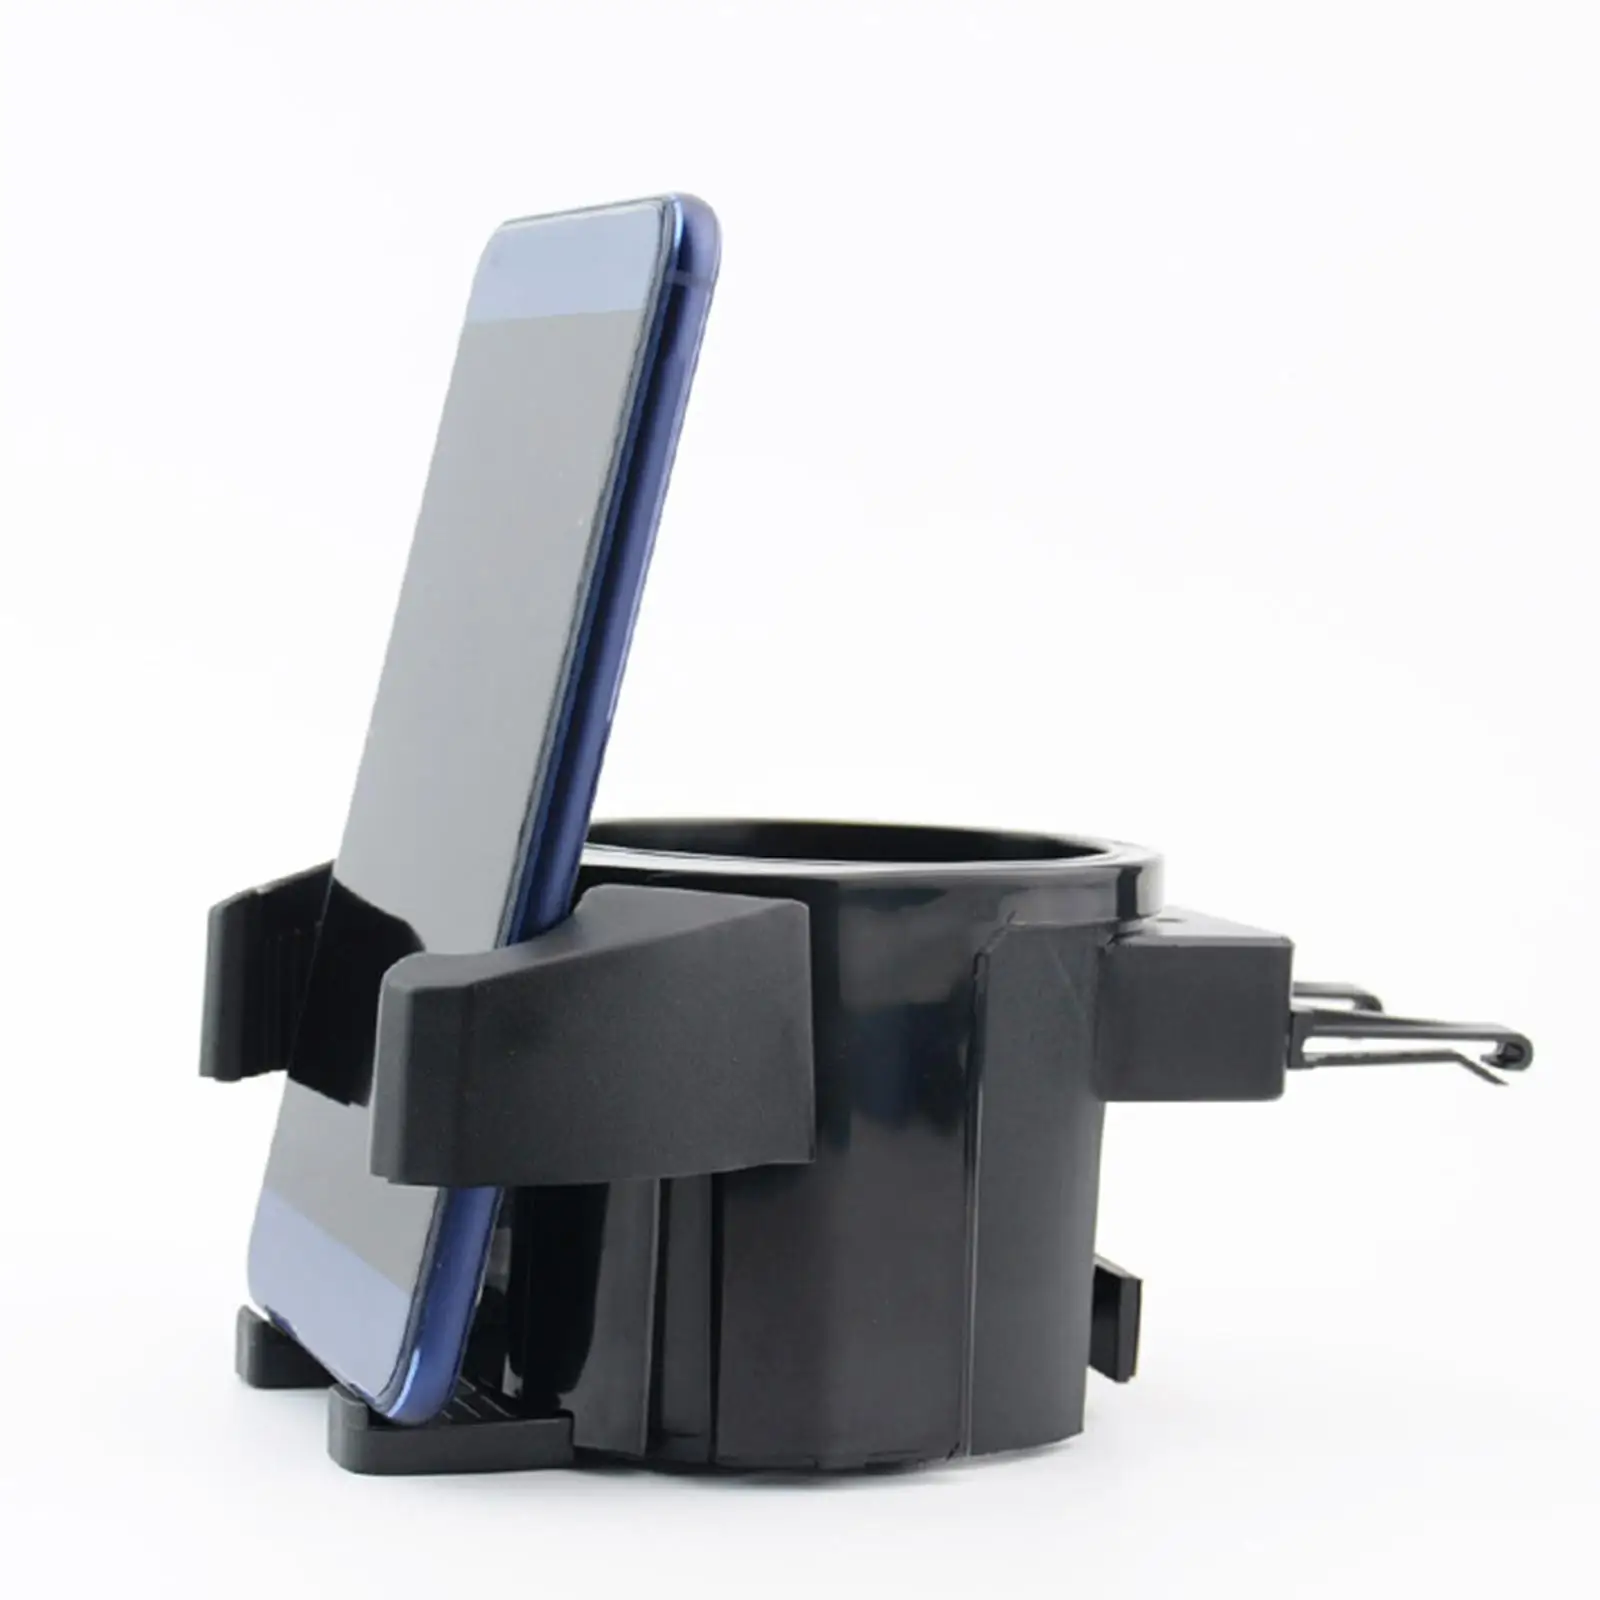 Cup Holder Expander with Phone Holder  Mount Expandable for Car